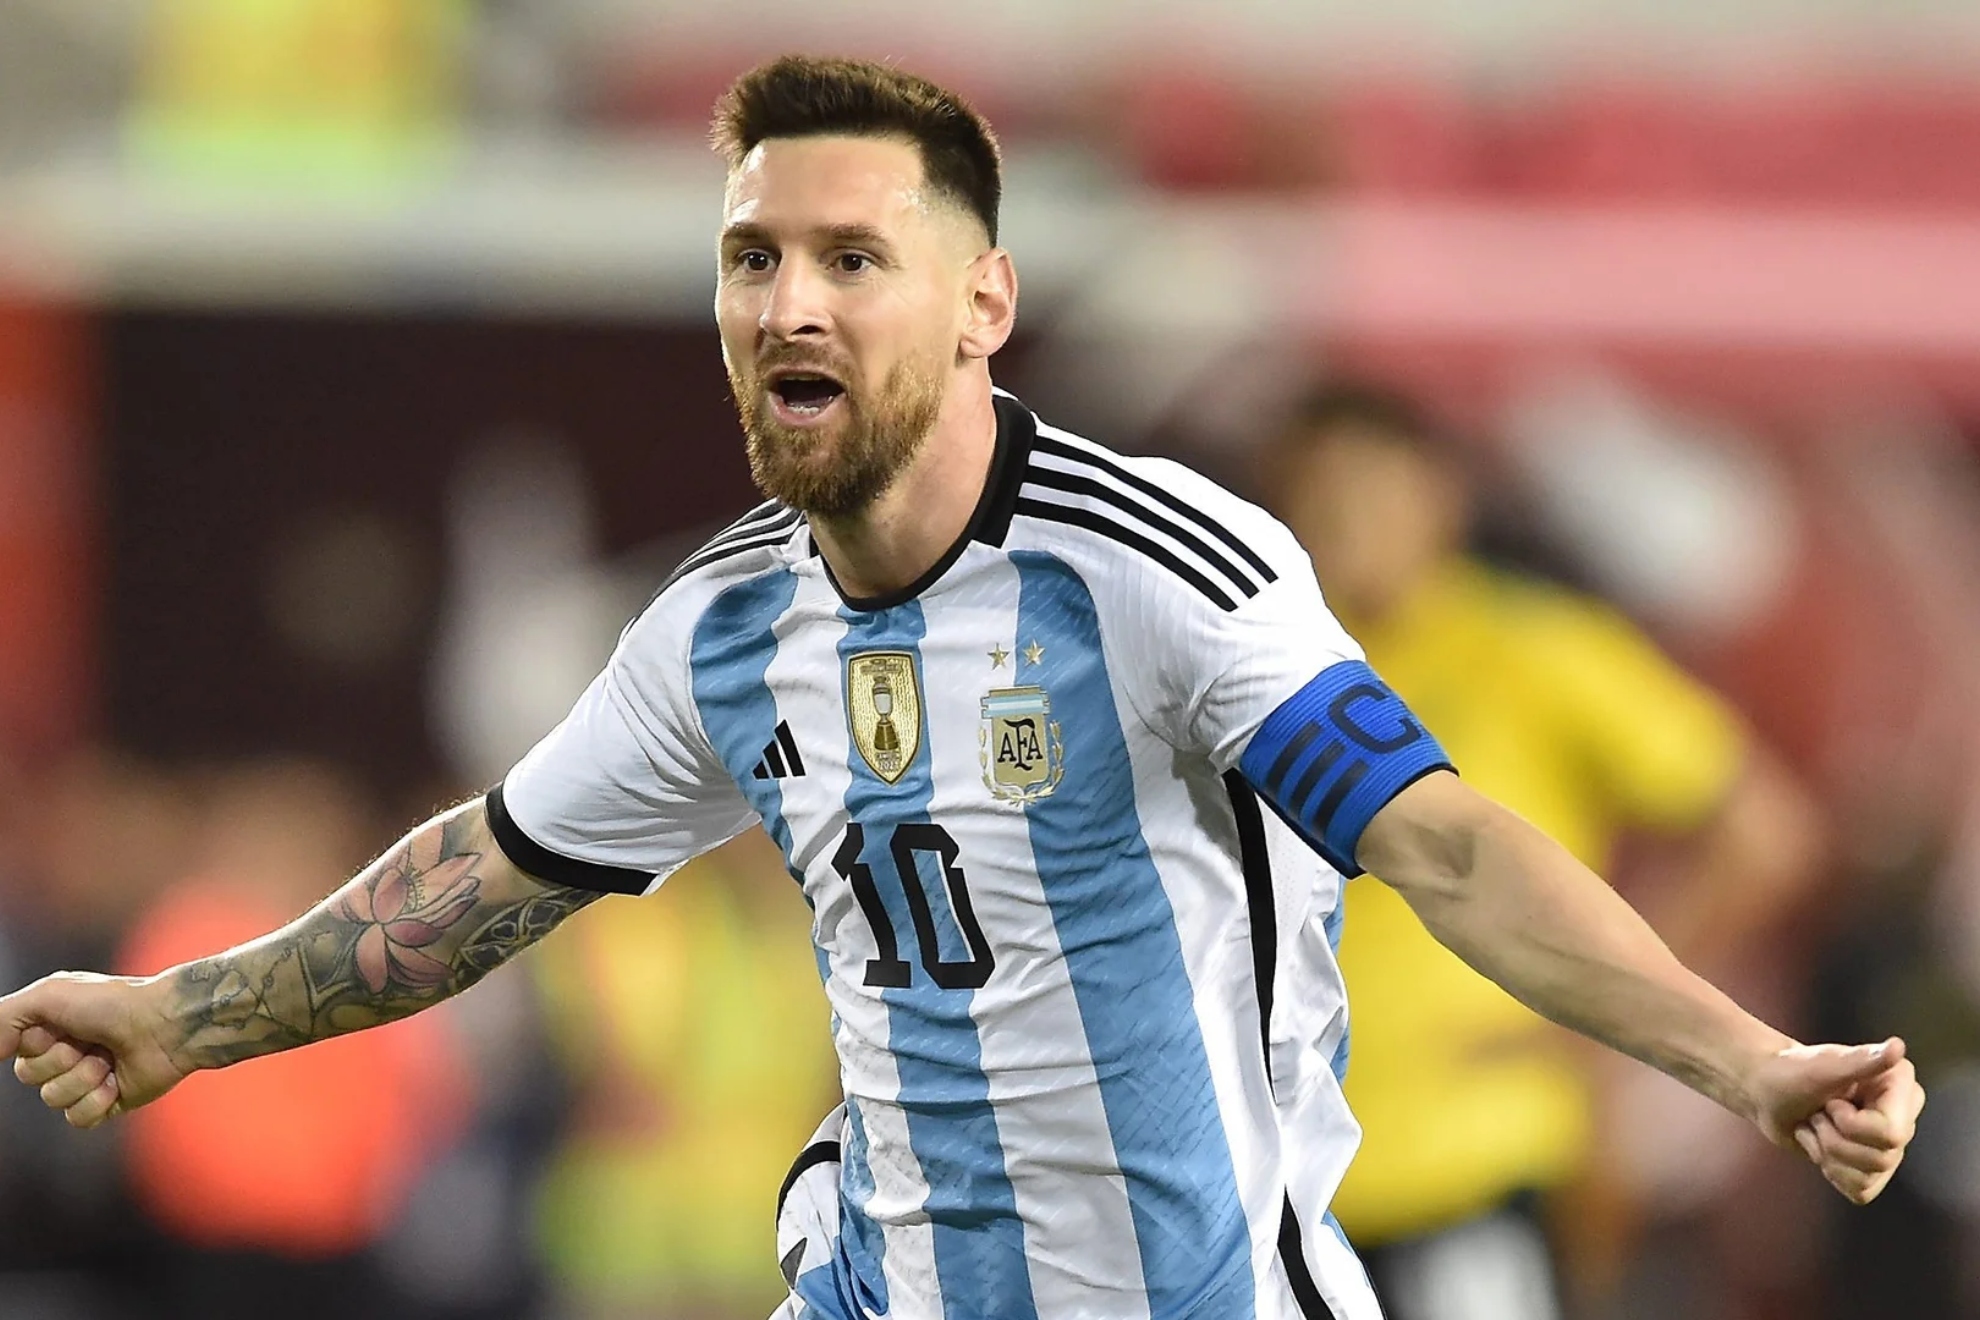 Leo Messi's essential food that is a must in his diet for the Qatar 2022 World Cup